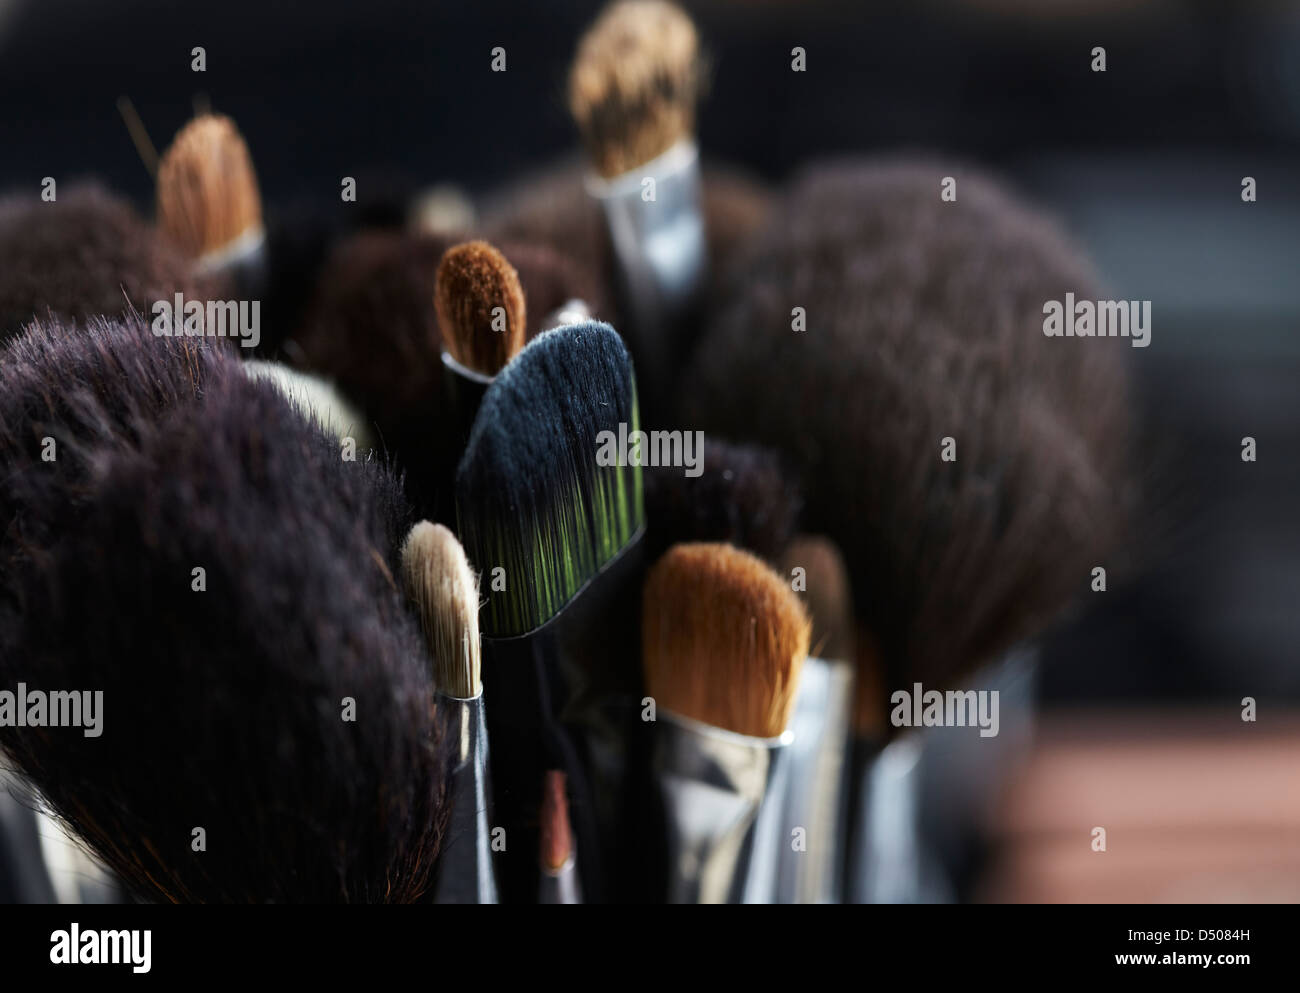 Macro shot of professional makeup brushes ready for use Stock Photo